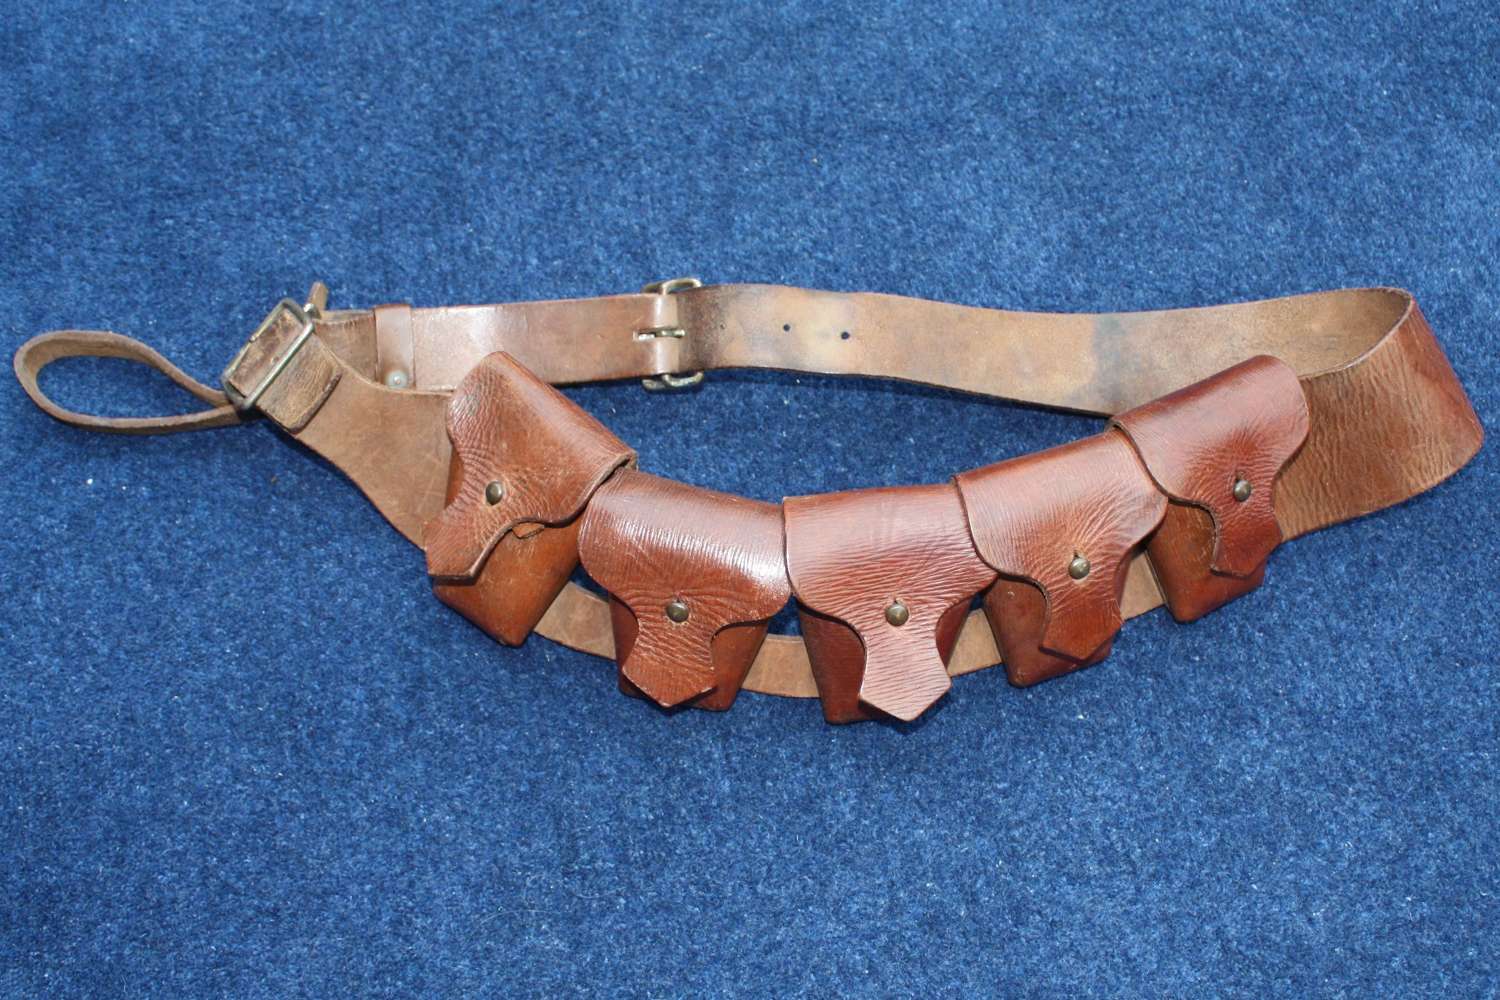 1903 PATTERN LEATHER AMMUNITION BANDOLIER FOR MOUNTED SOLDIERS